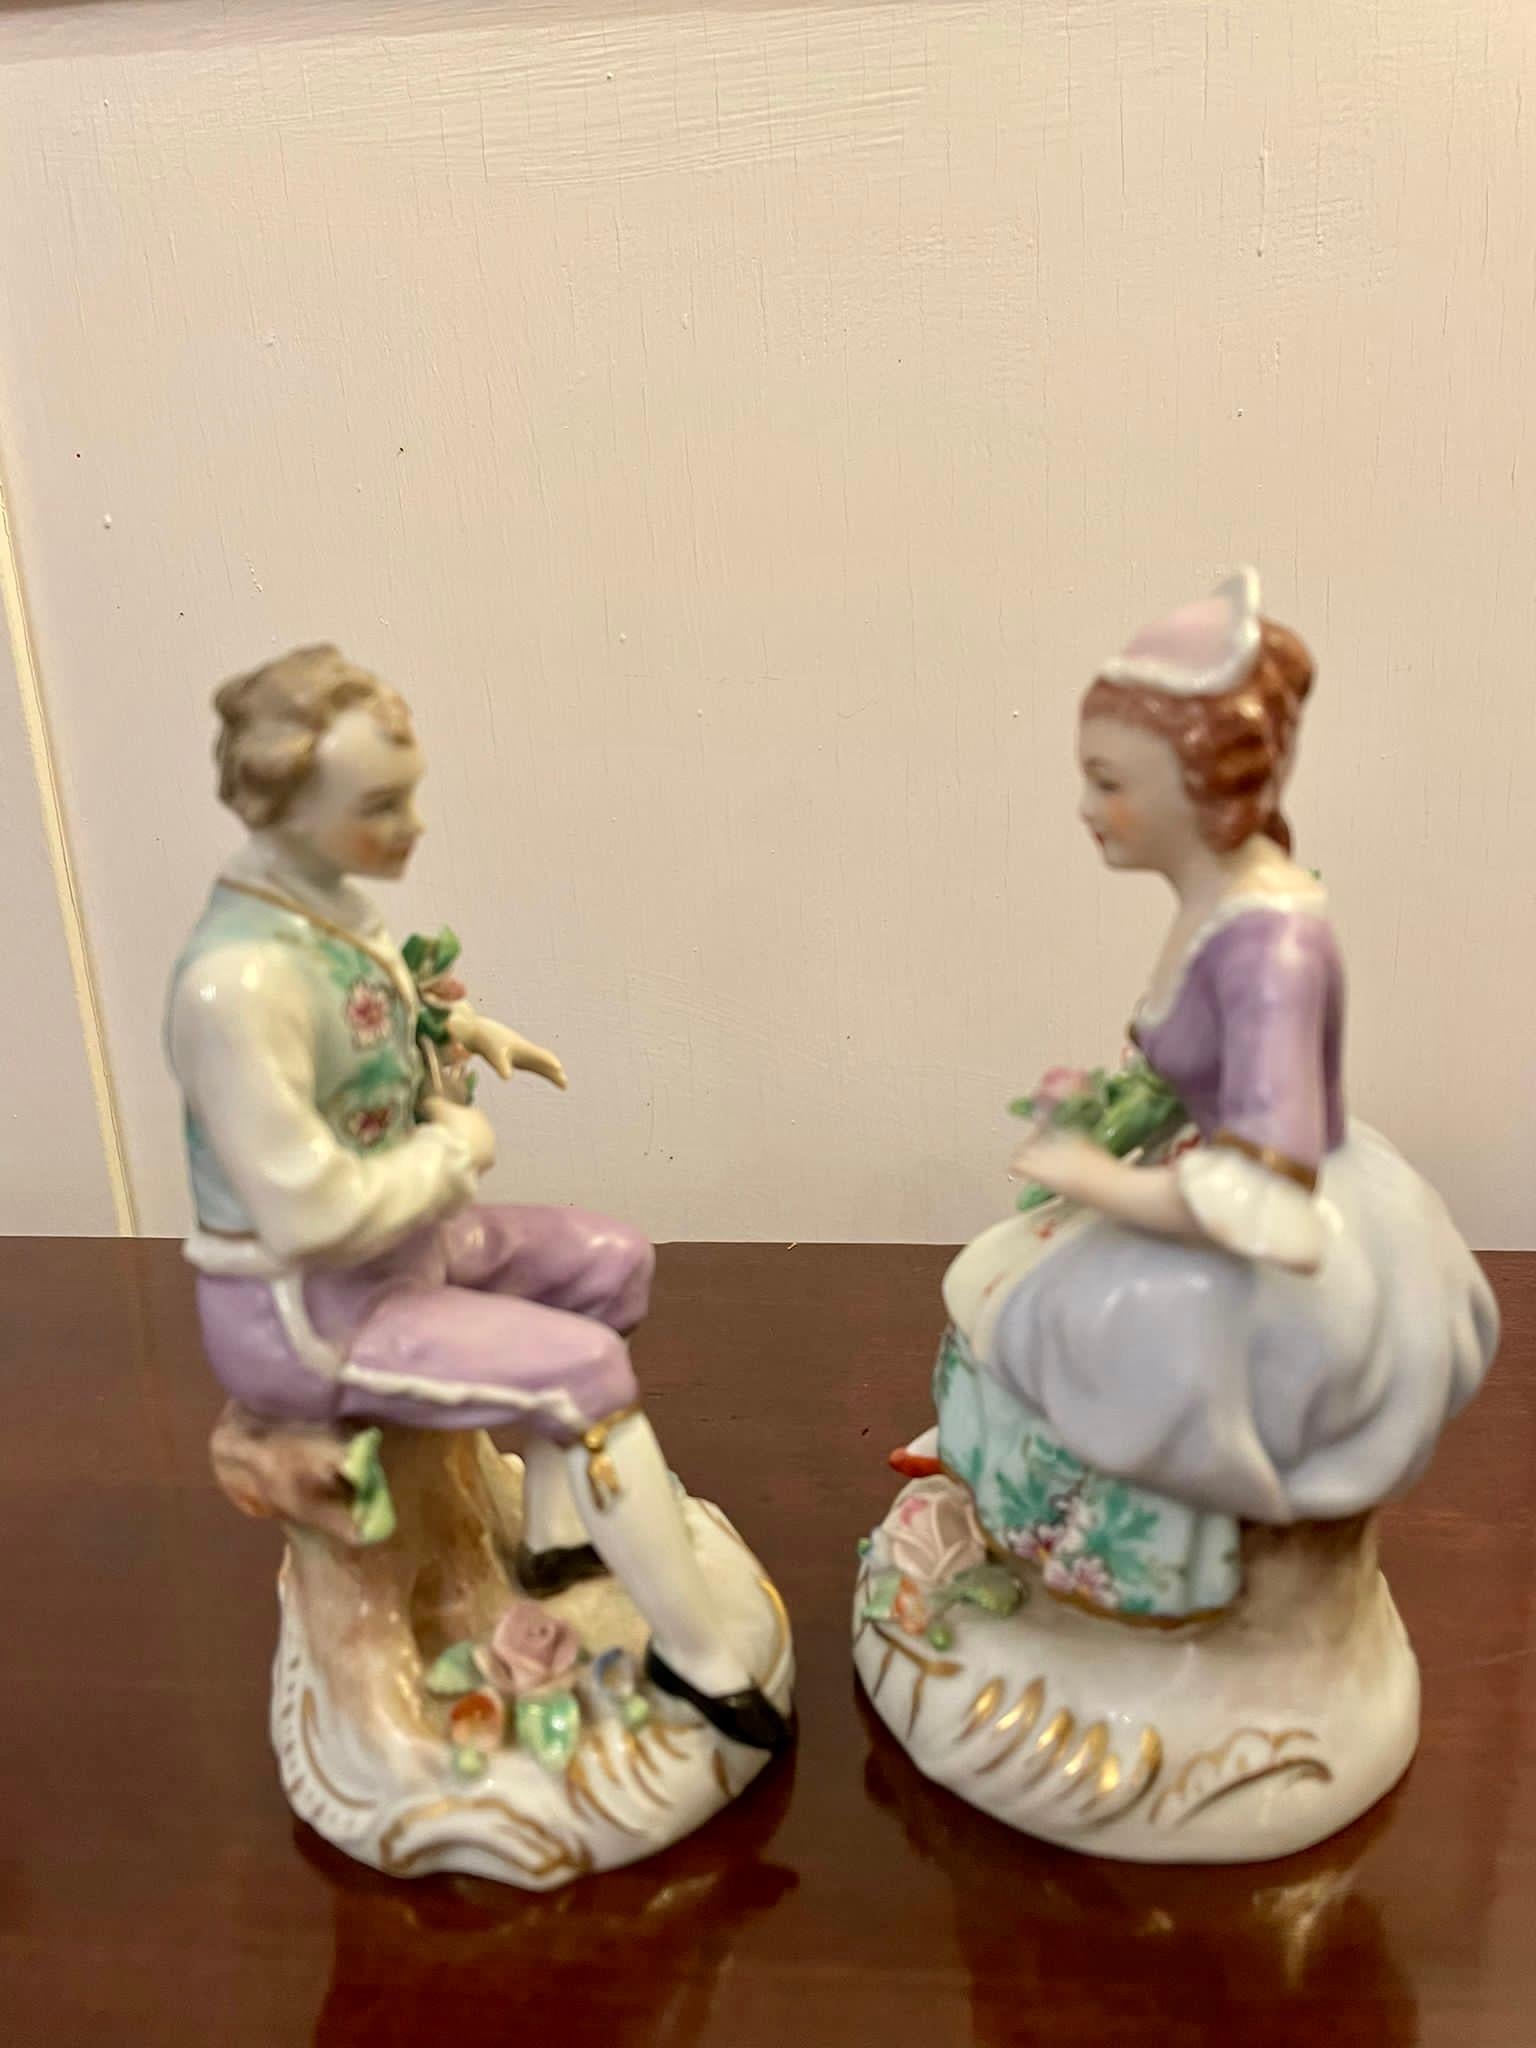 Pair of original antique Victorian Sitzendorf figures 
Pair of original antique Victorian Sitzendorf figures of a gentleman reclining on a tree stump pruning roses, the lady also seated with a bouquet of flowers and a single rose in the opposite